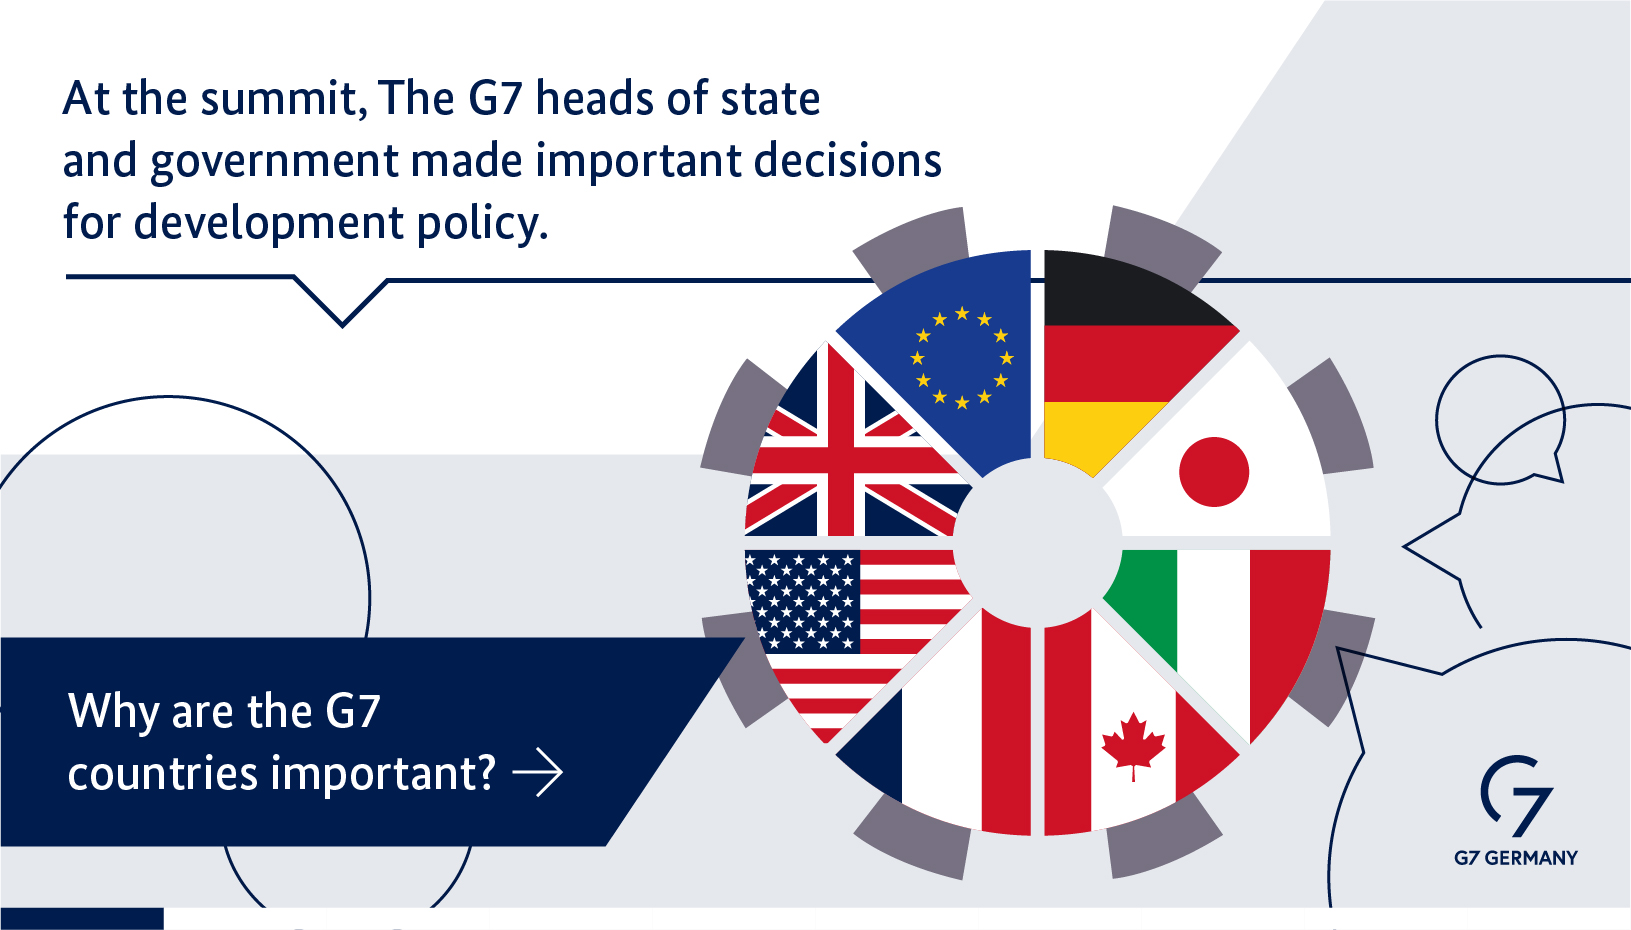 At their summit, the G7 heads of state and government made important decisions for development policy. Why are the G7 countries important?